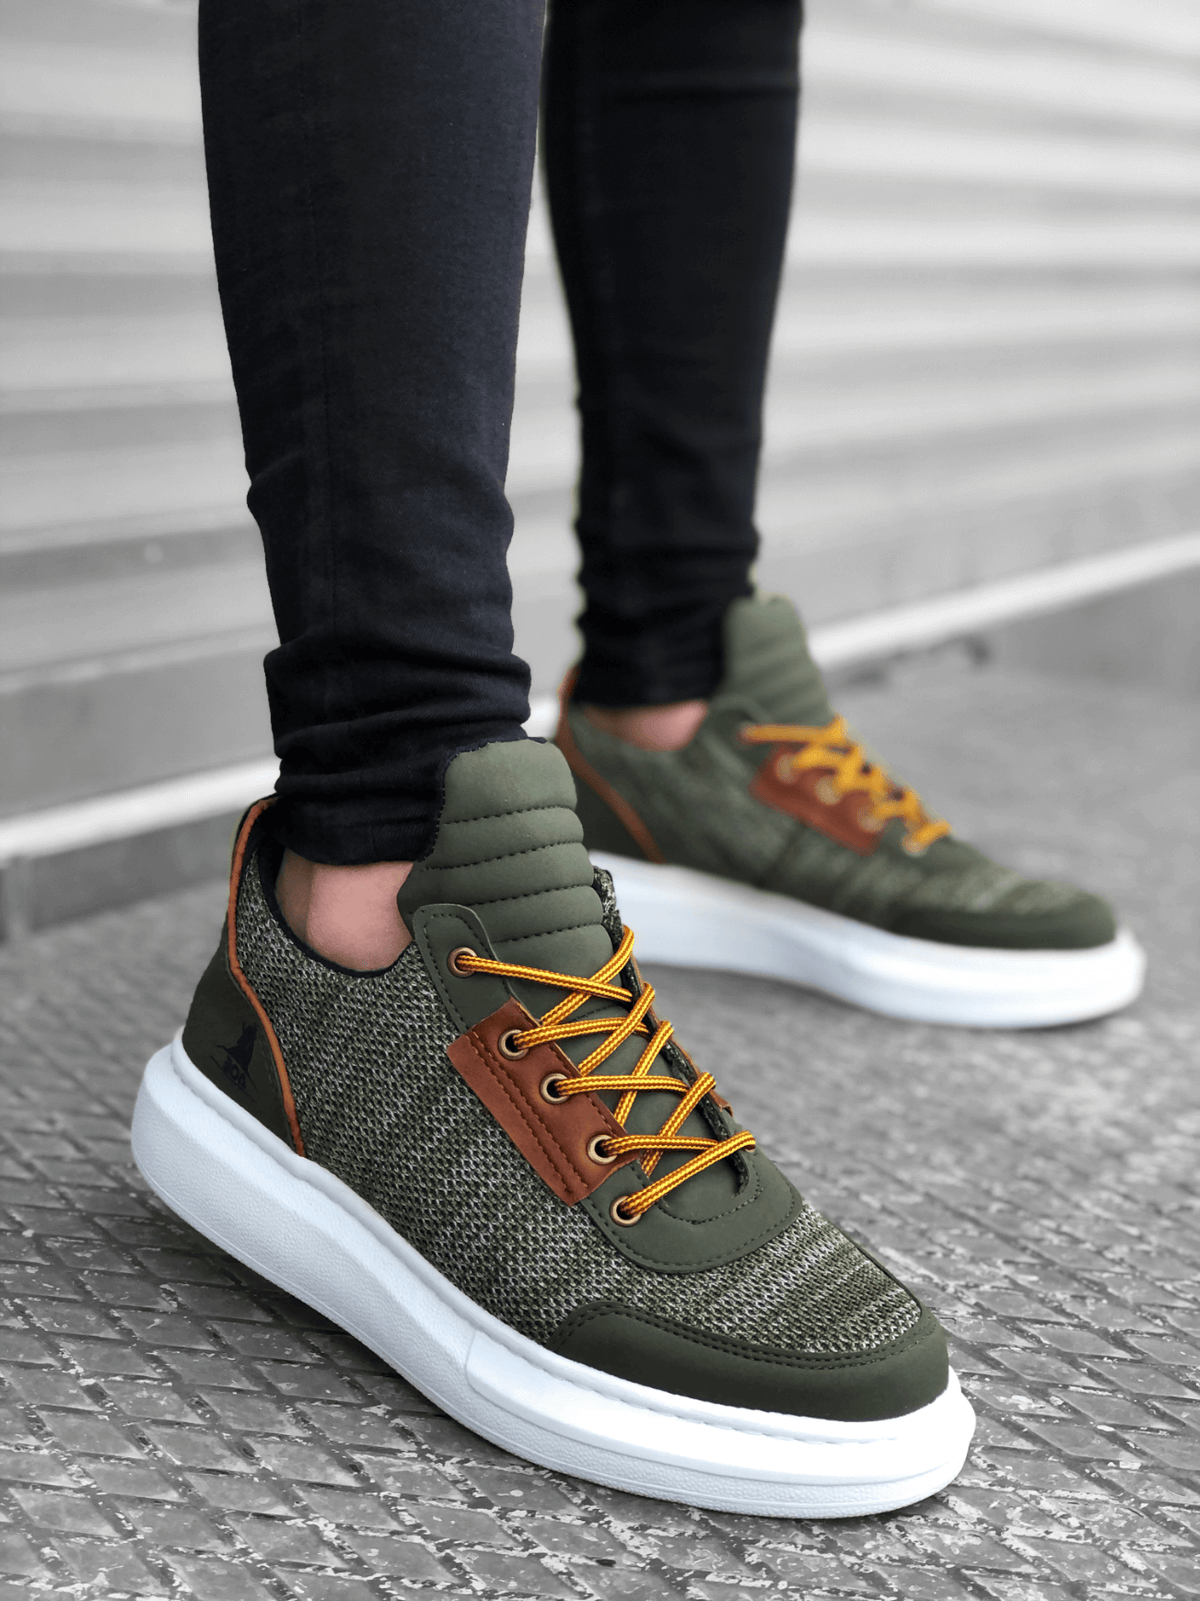 STM Sneaker BA0606 Lace-up Comfortable High Sole Khaki Casual Men's Sneakers - STREETMODE™